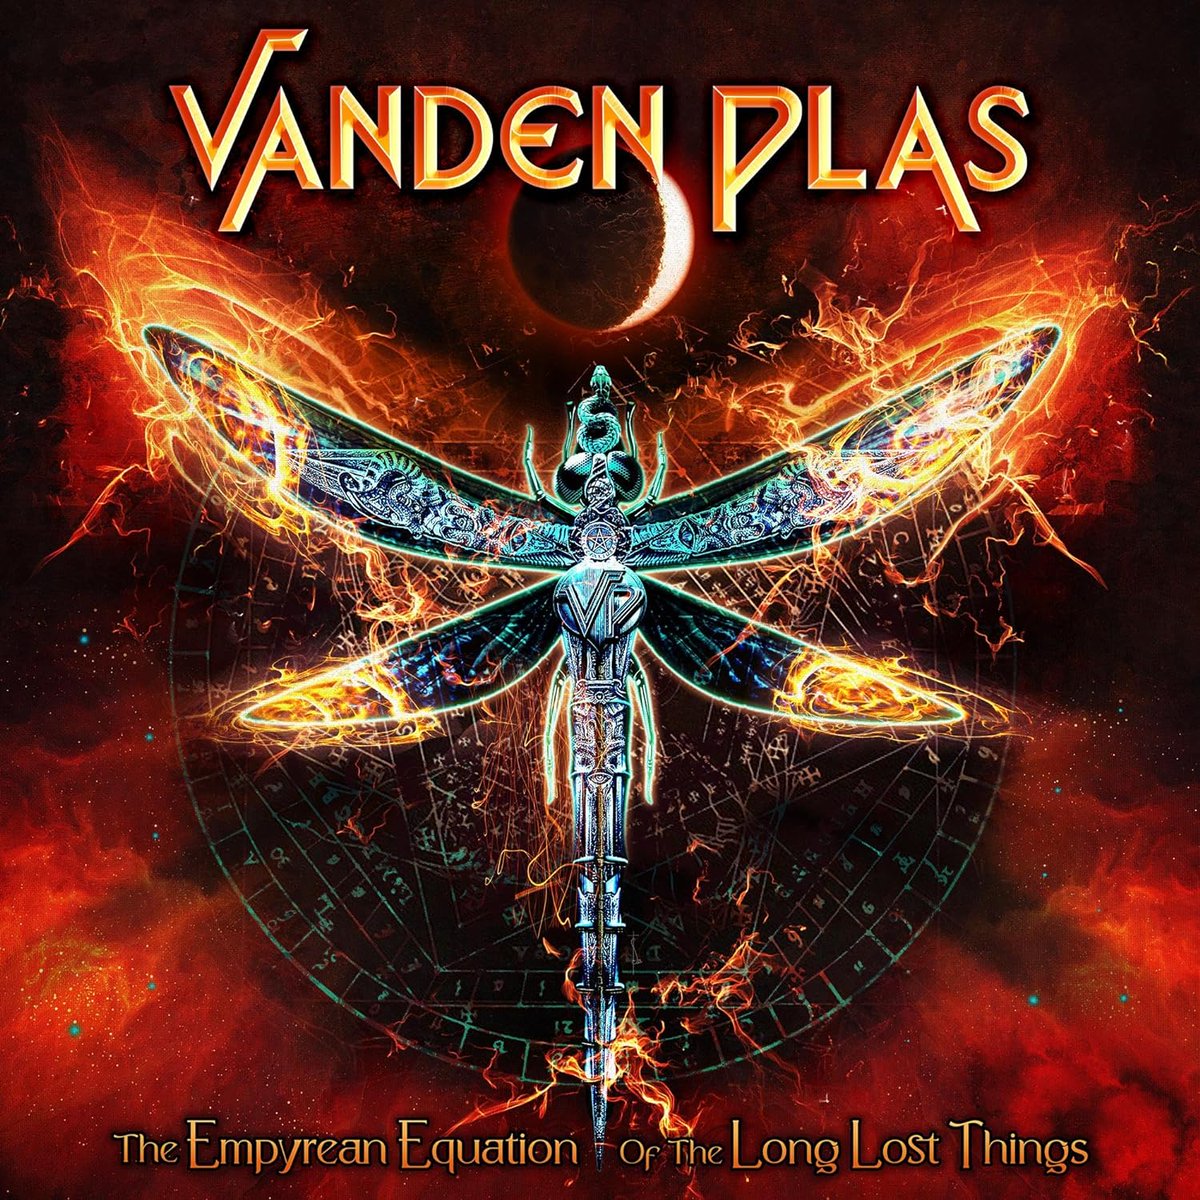 New at REAL GONE: Vanden Plas - The Empyrean Equation of Long Lost Things (review) realgonerocks.com/2024/04/vanden… A contender for the best Vanden Plas album to date.